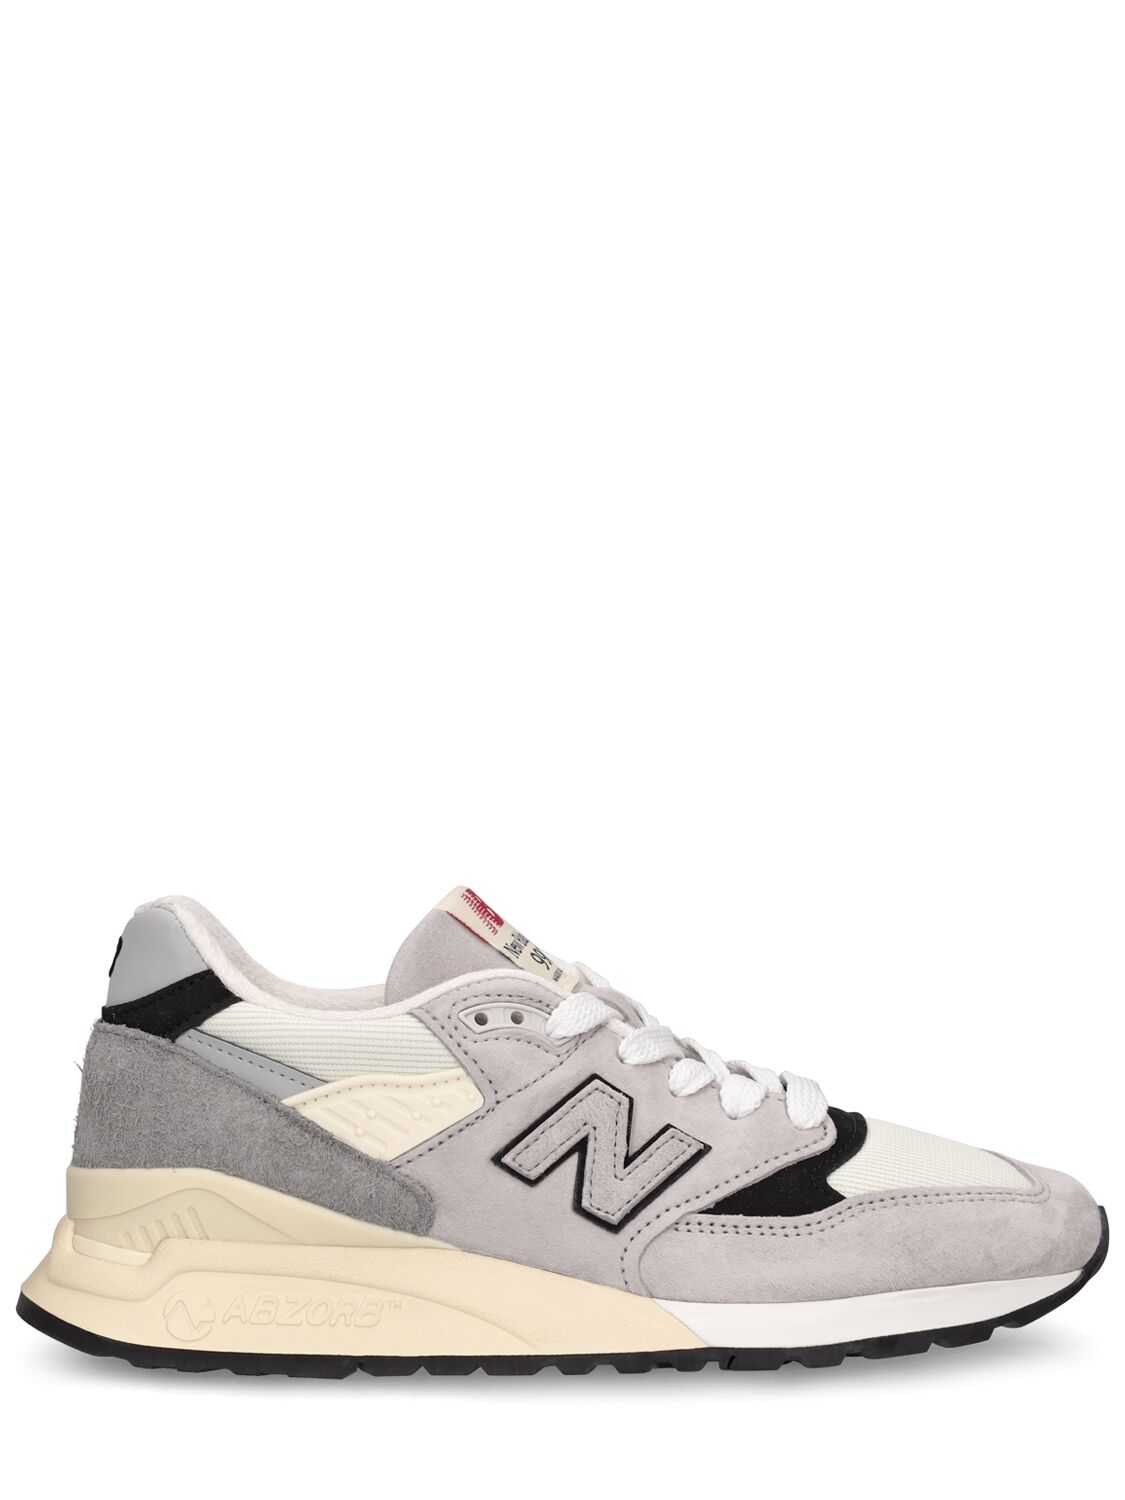 NEW BALANCE 998 MADE IN USA SNEAKERS